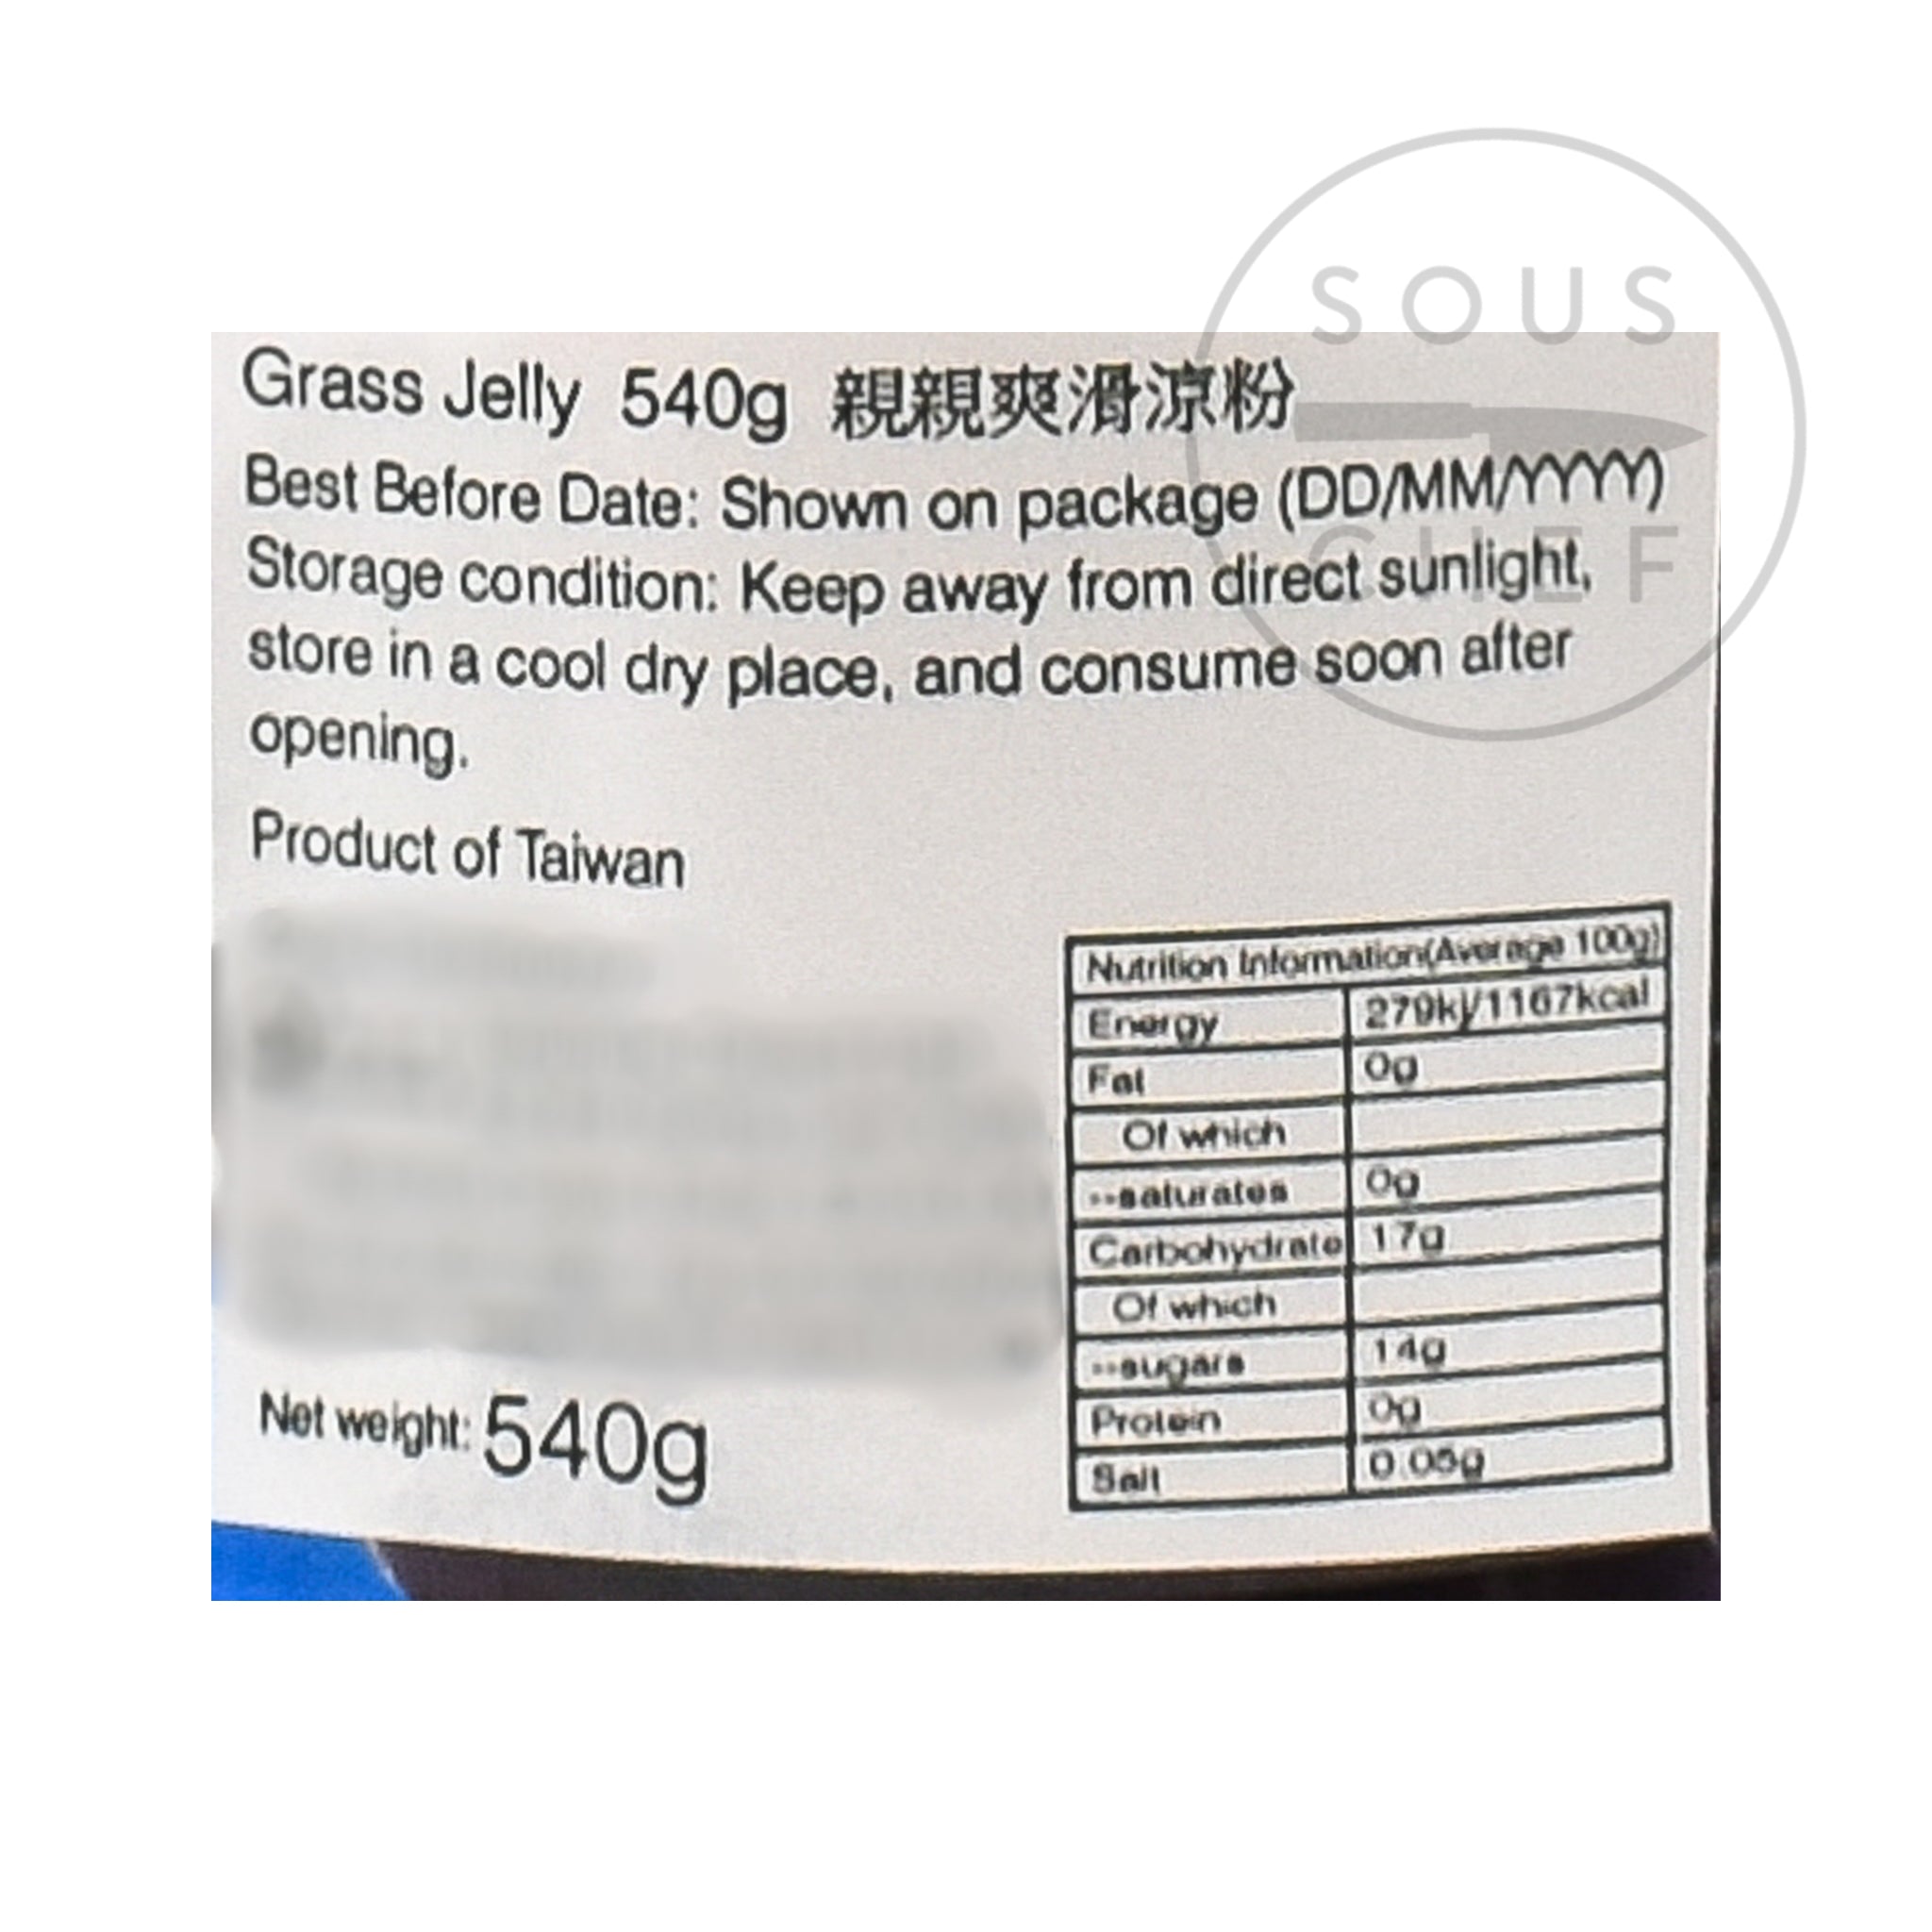 Grass Jelly 540g nutritional information ingredients